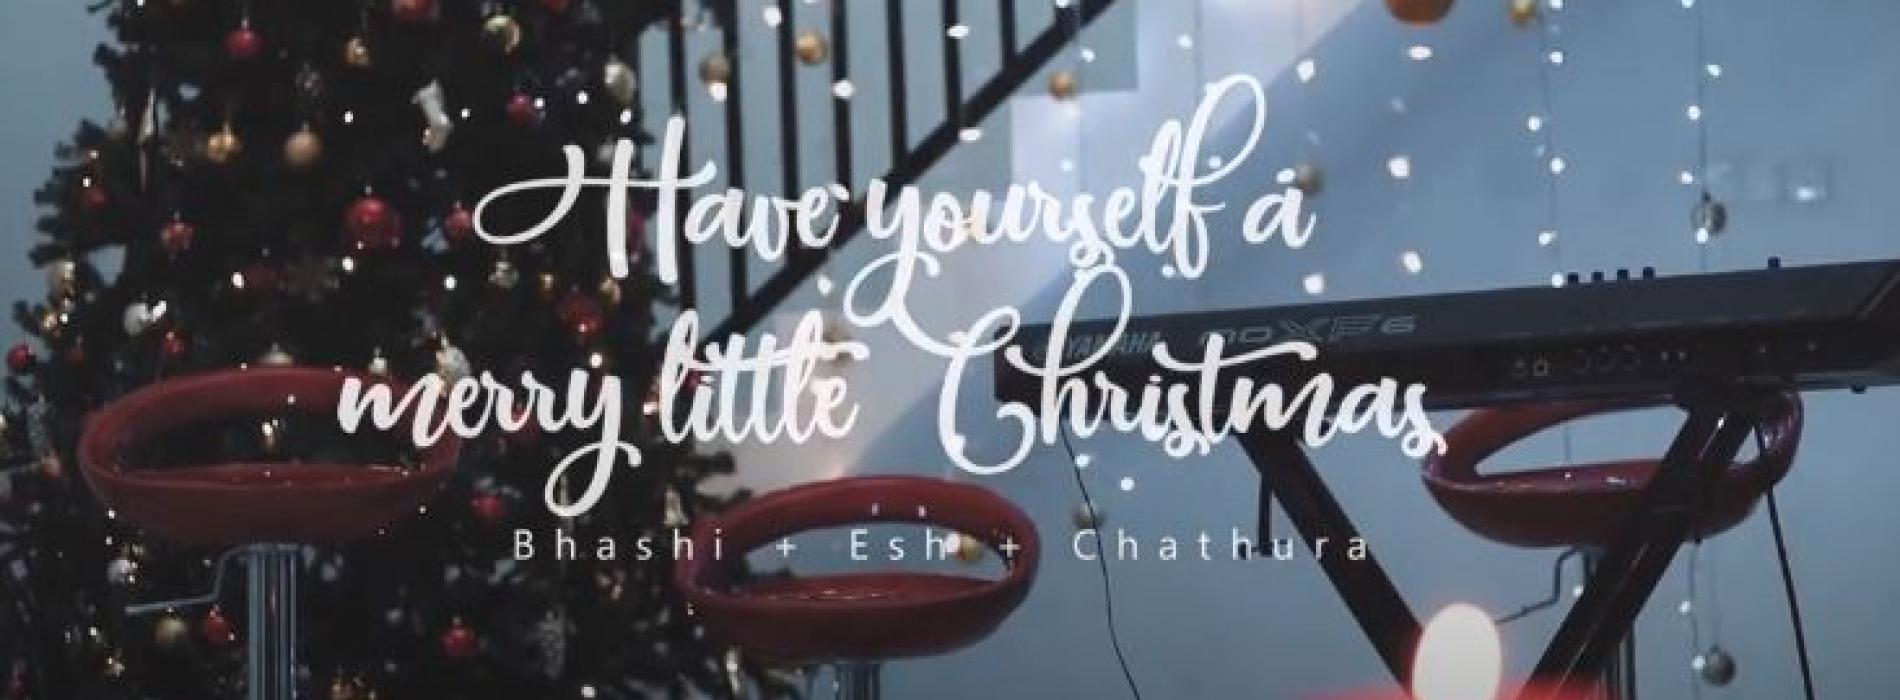 New Music : Bhashi Alwis – Have Yourself a Merry Little Christmas Feat Esh & Chathura